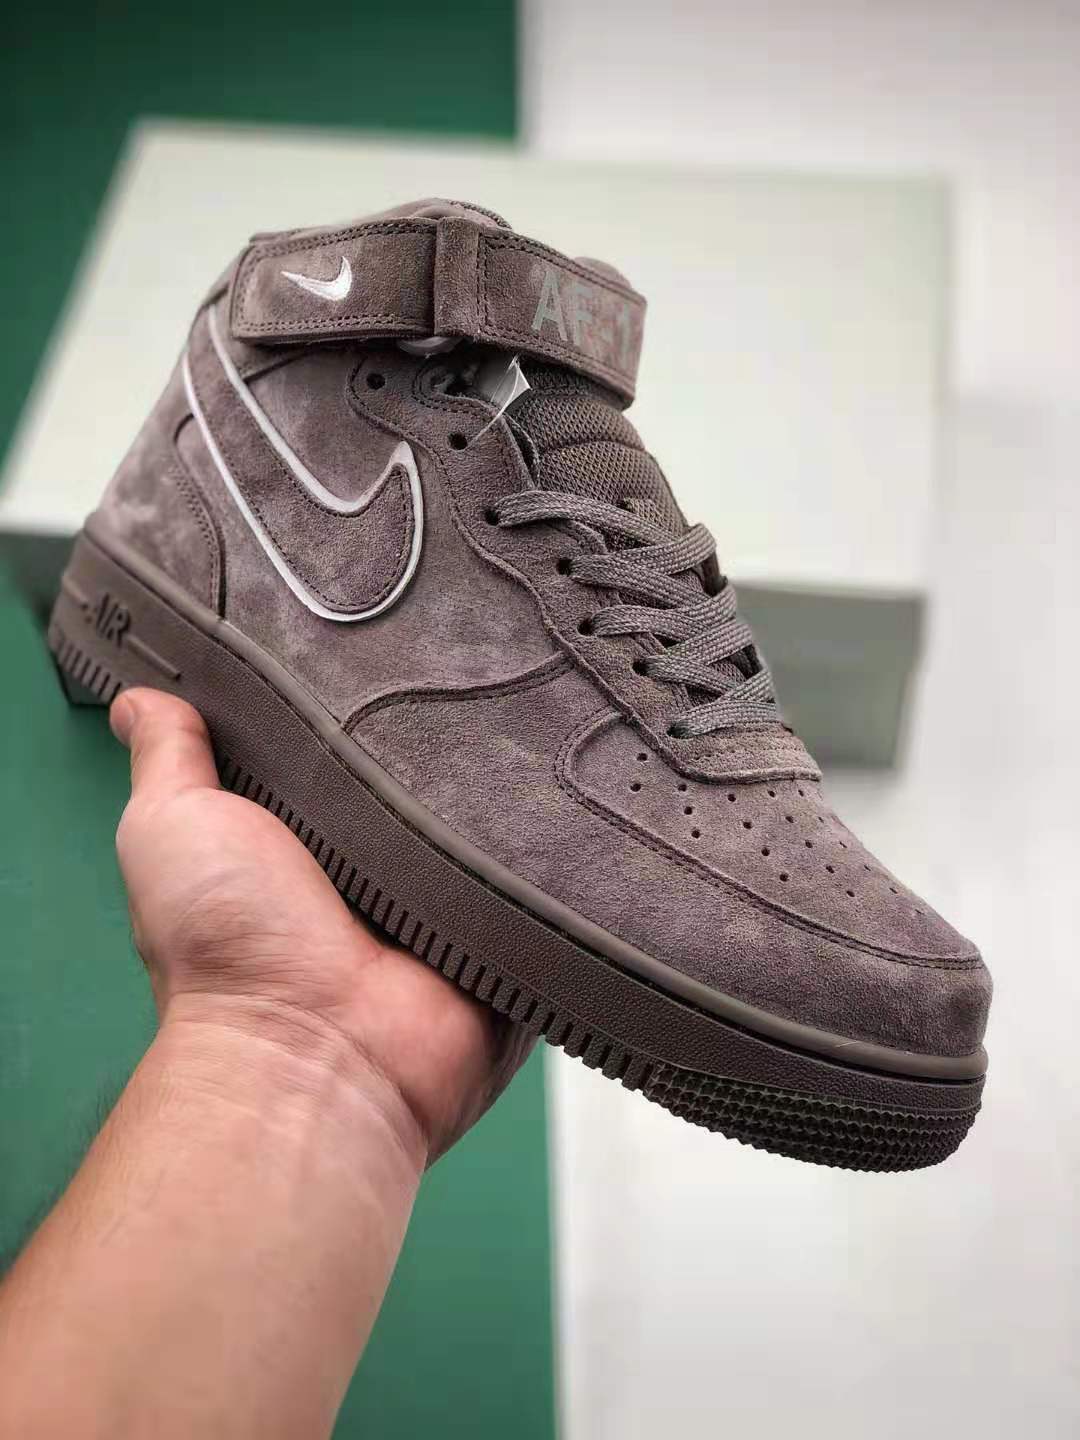 Nike Air Force 1 High '07 LV8 Suede Atmosphere Grey AA1118-003 | Limited Edition High-Top Sneakers